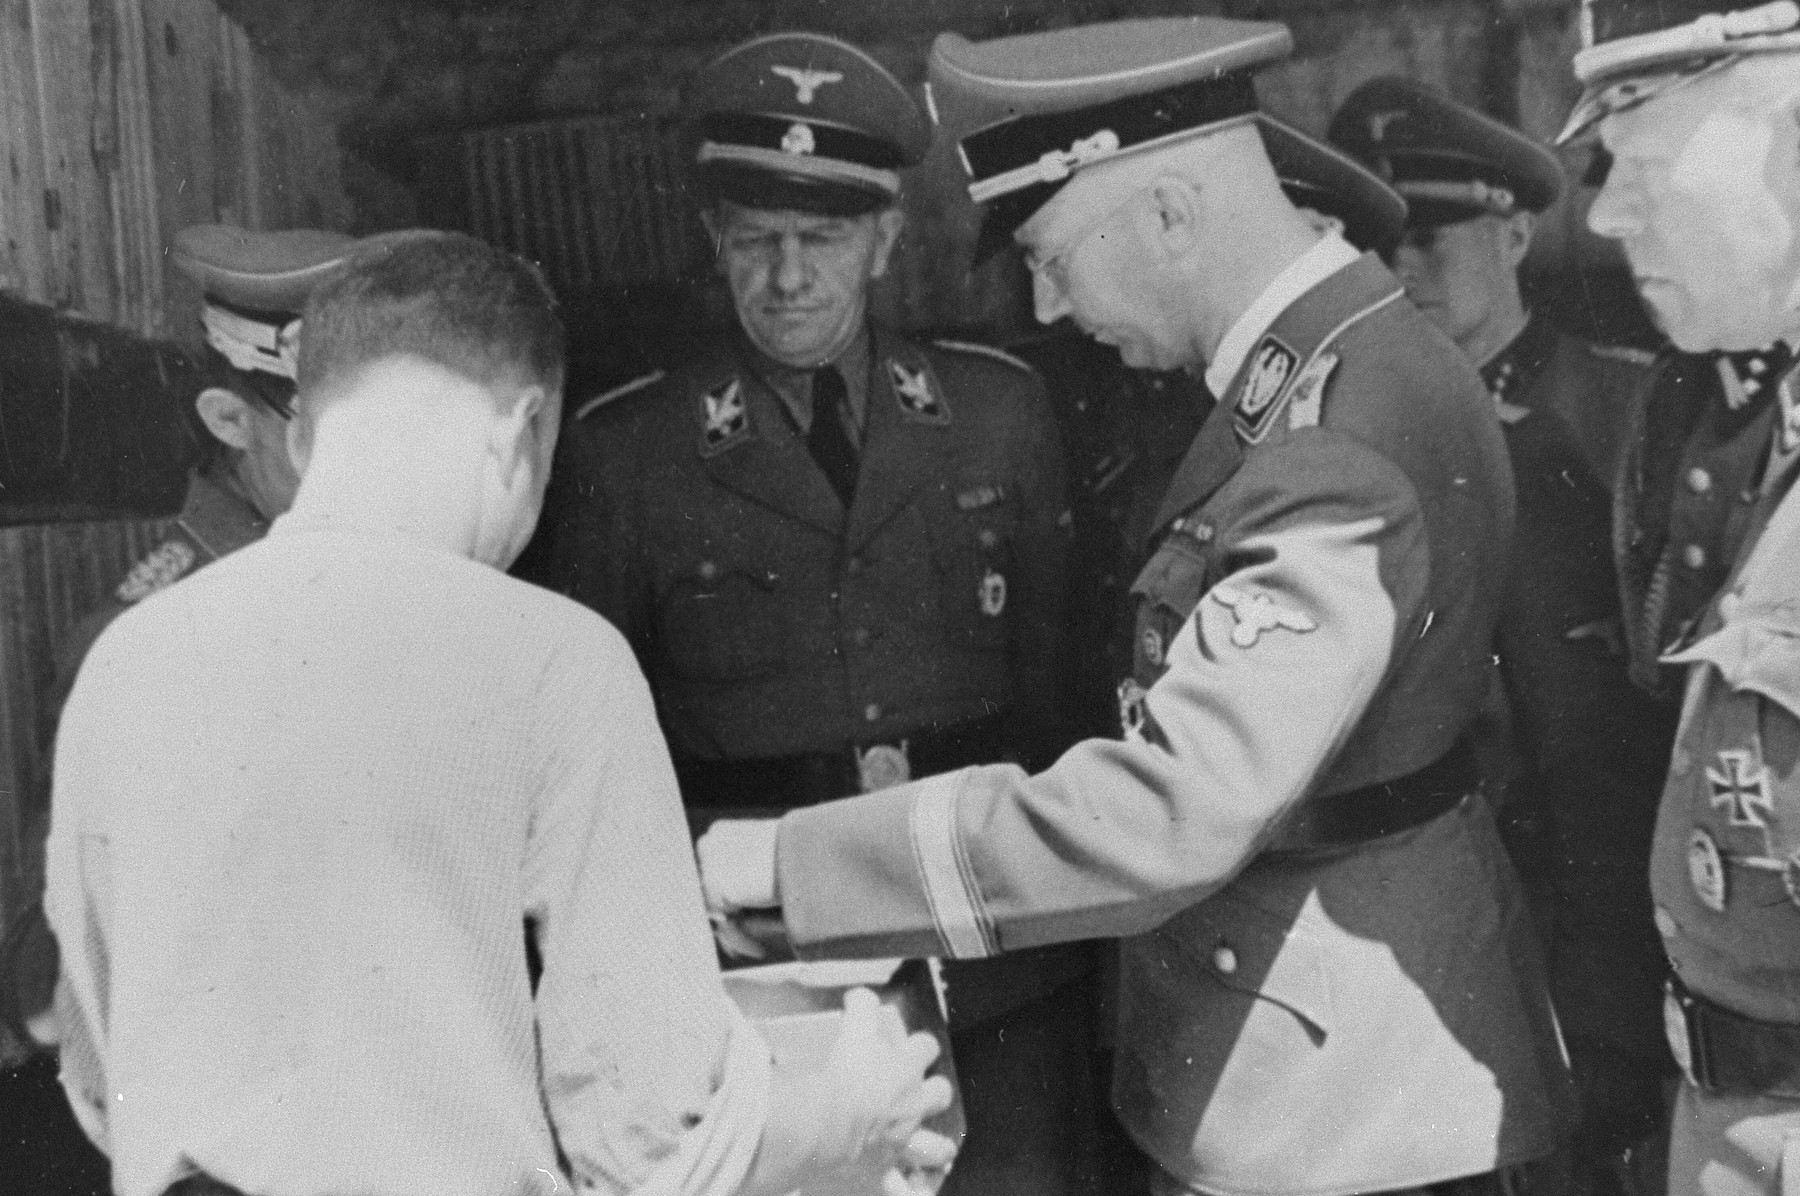 Reichsfuehrer SS Heinrich Himmler examines the contents of a box during an inspection tour of the Monowitz-Buna building site.   

Pictured on the far right is Himmler's bodyguard, SS Hauptsturmfuehrer Josef Kiermaier.  In the center is SS-Gruppenfuehrer Hanns Johst.